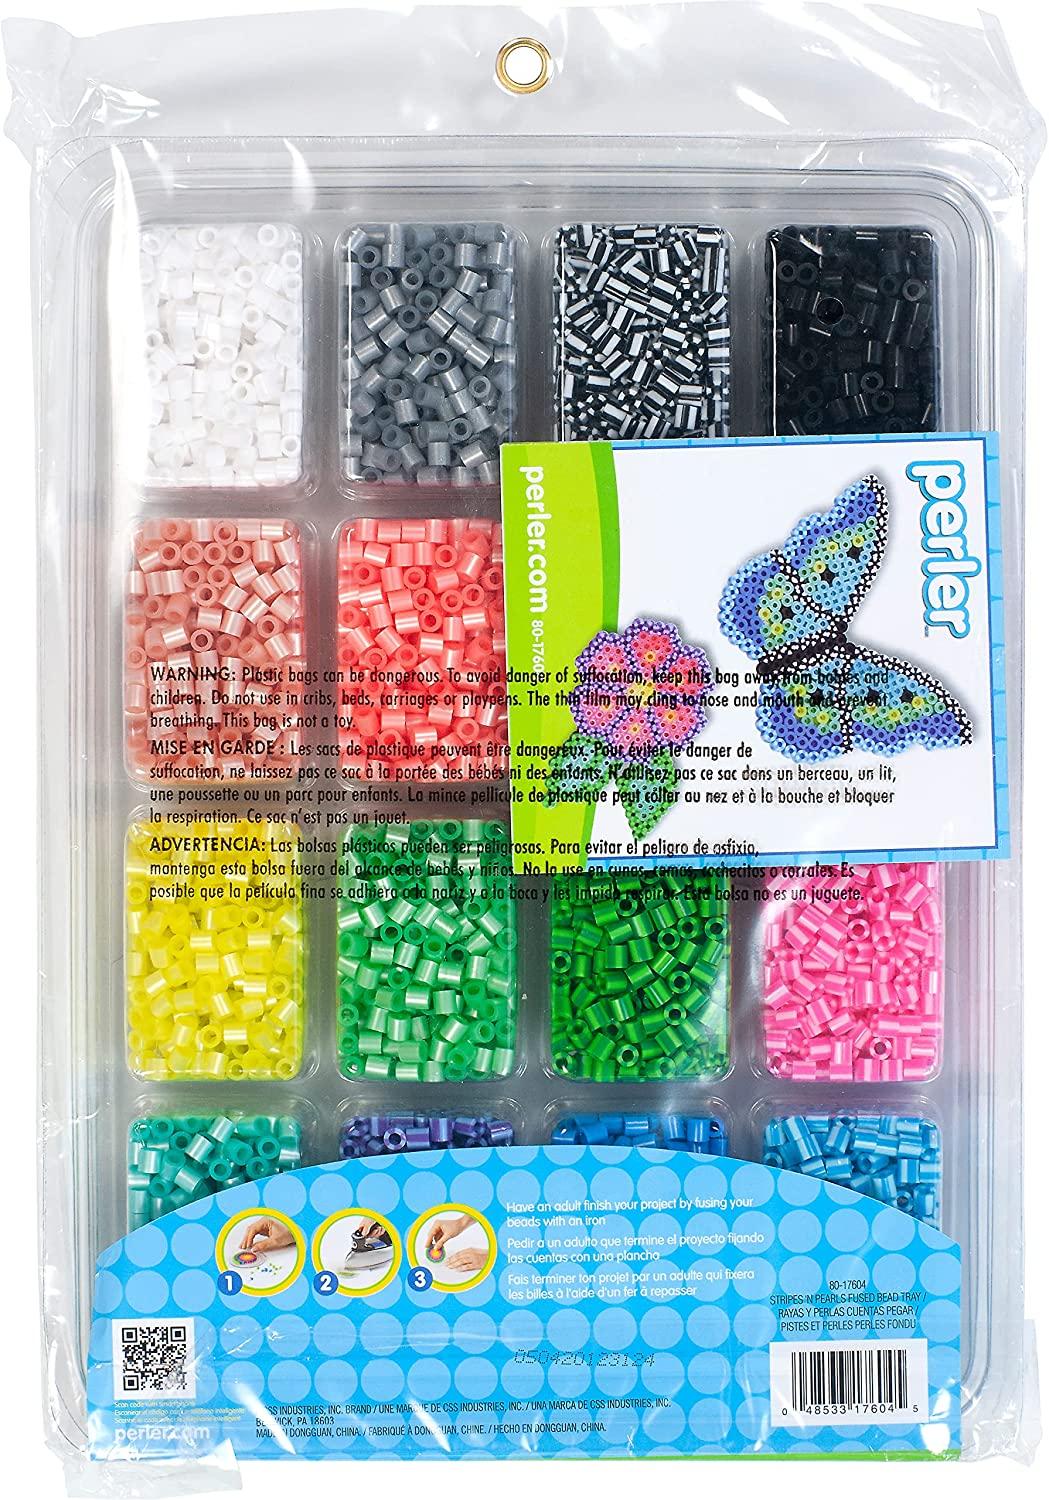 Perler Bead Kits for Kids to Craft With